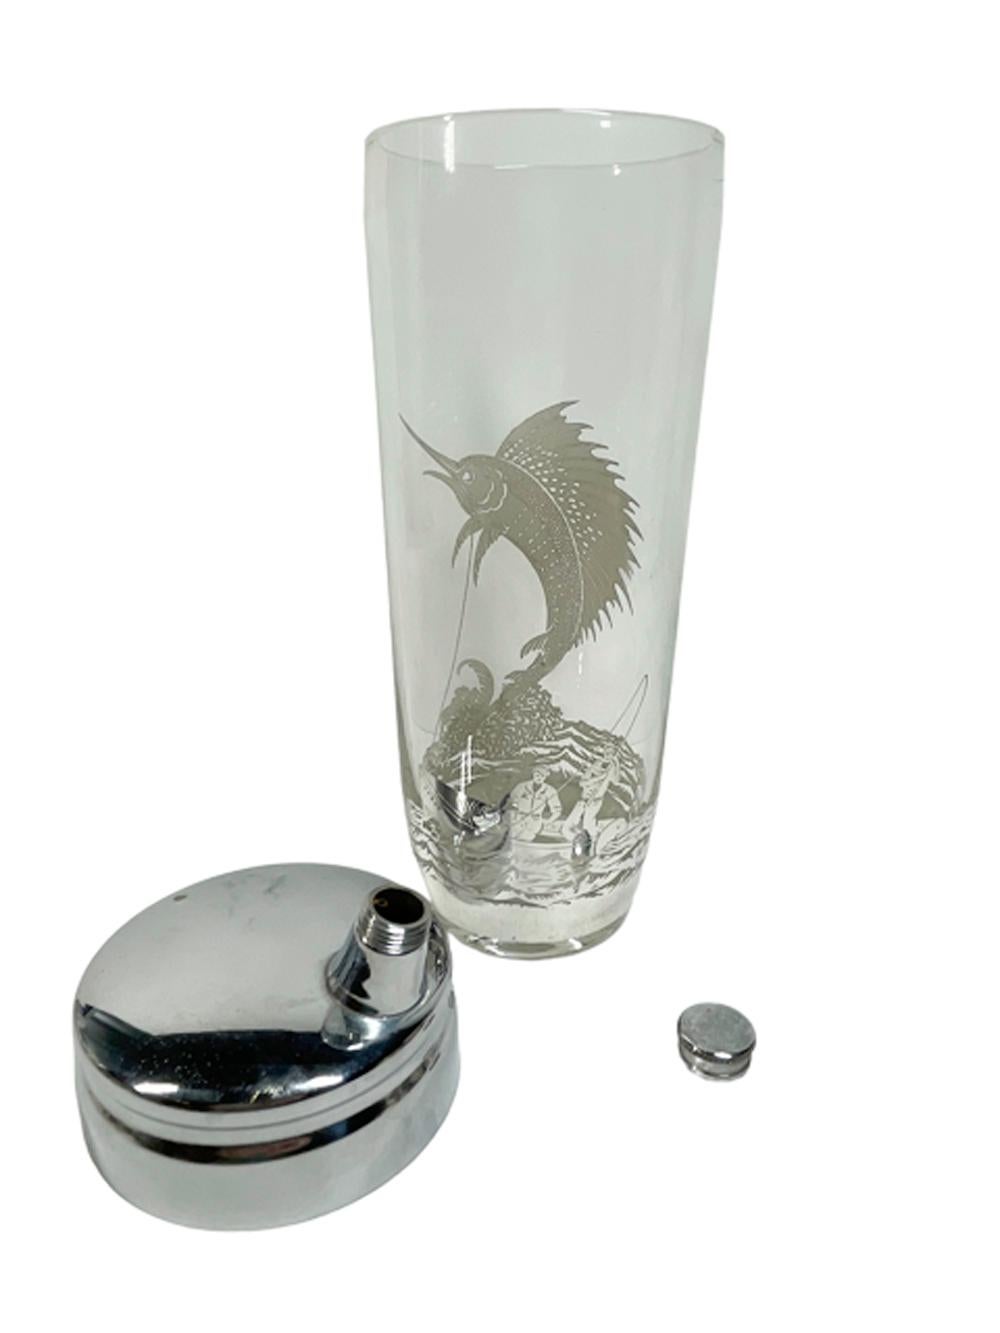 Art Deco Silver Overlay Sailfish Cocktail Shaker & Six DOF by Rockwell Silver For Sale 3